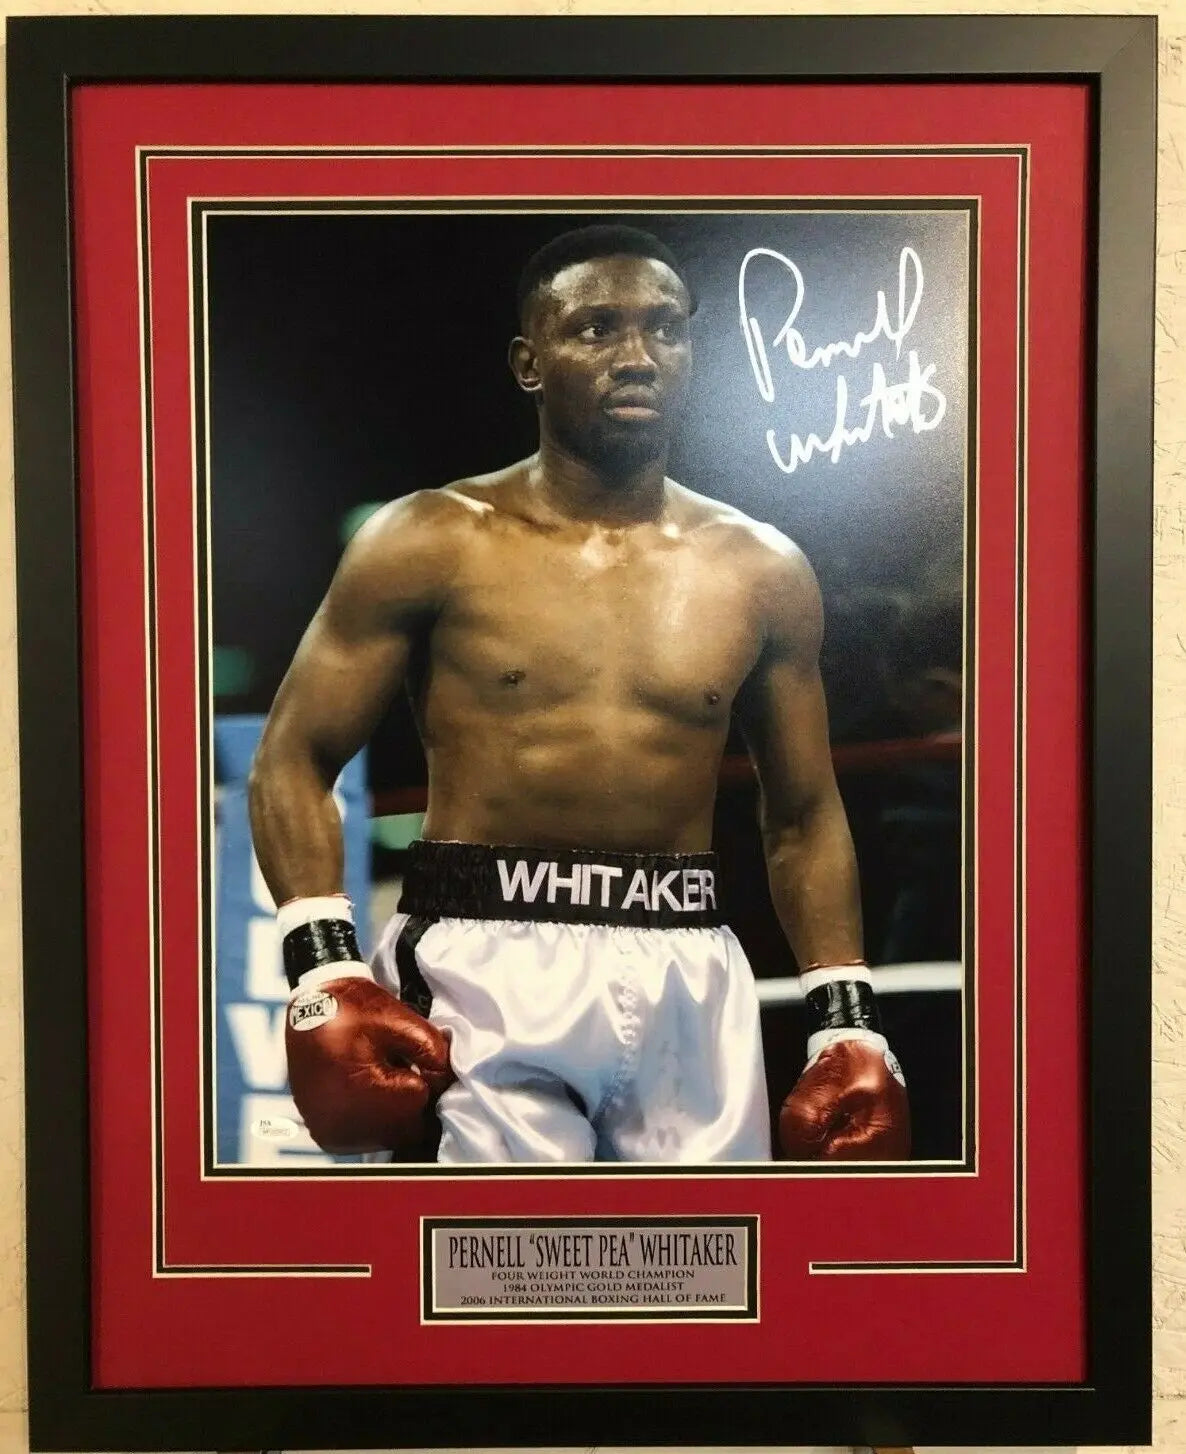 MVP Authentics Pernell "Sweet Pea" Whitaker Framed Signed 16X20 Photo Jsa Coa 179.10 sports jersey framing , jersey framing